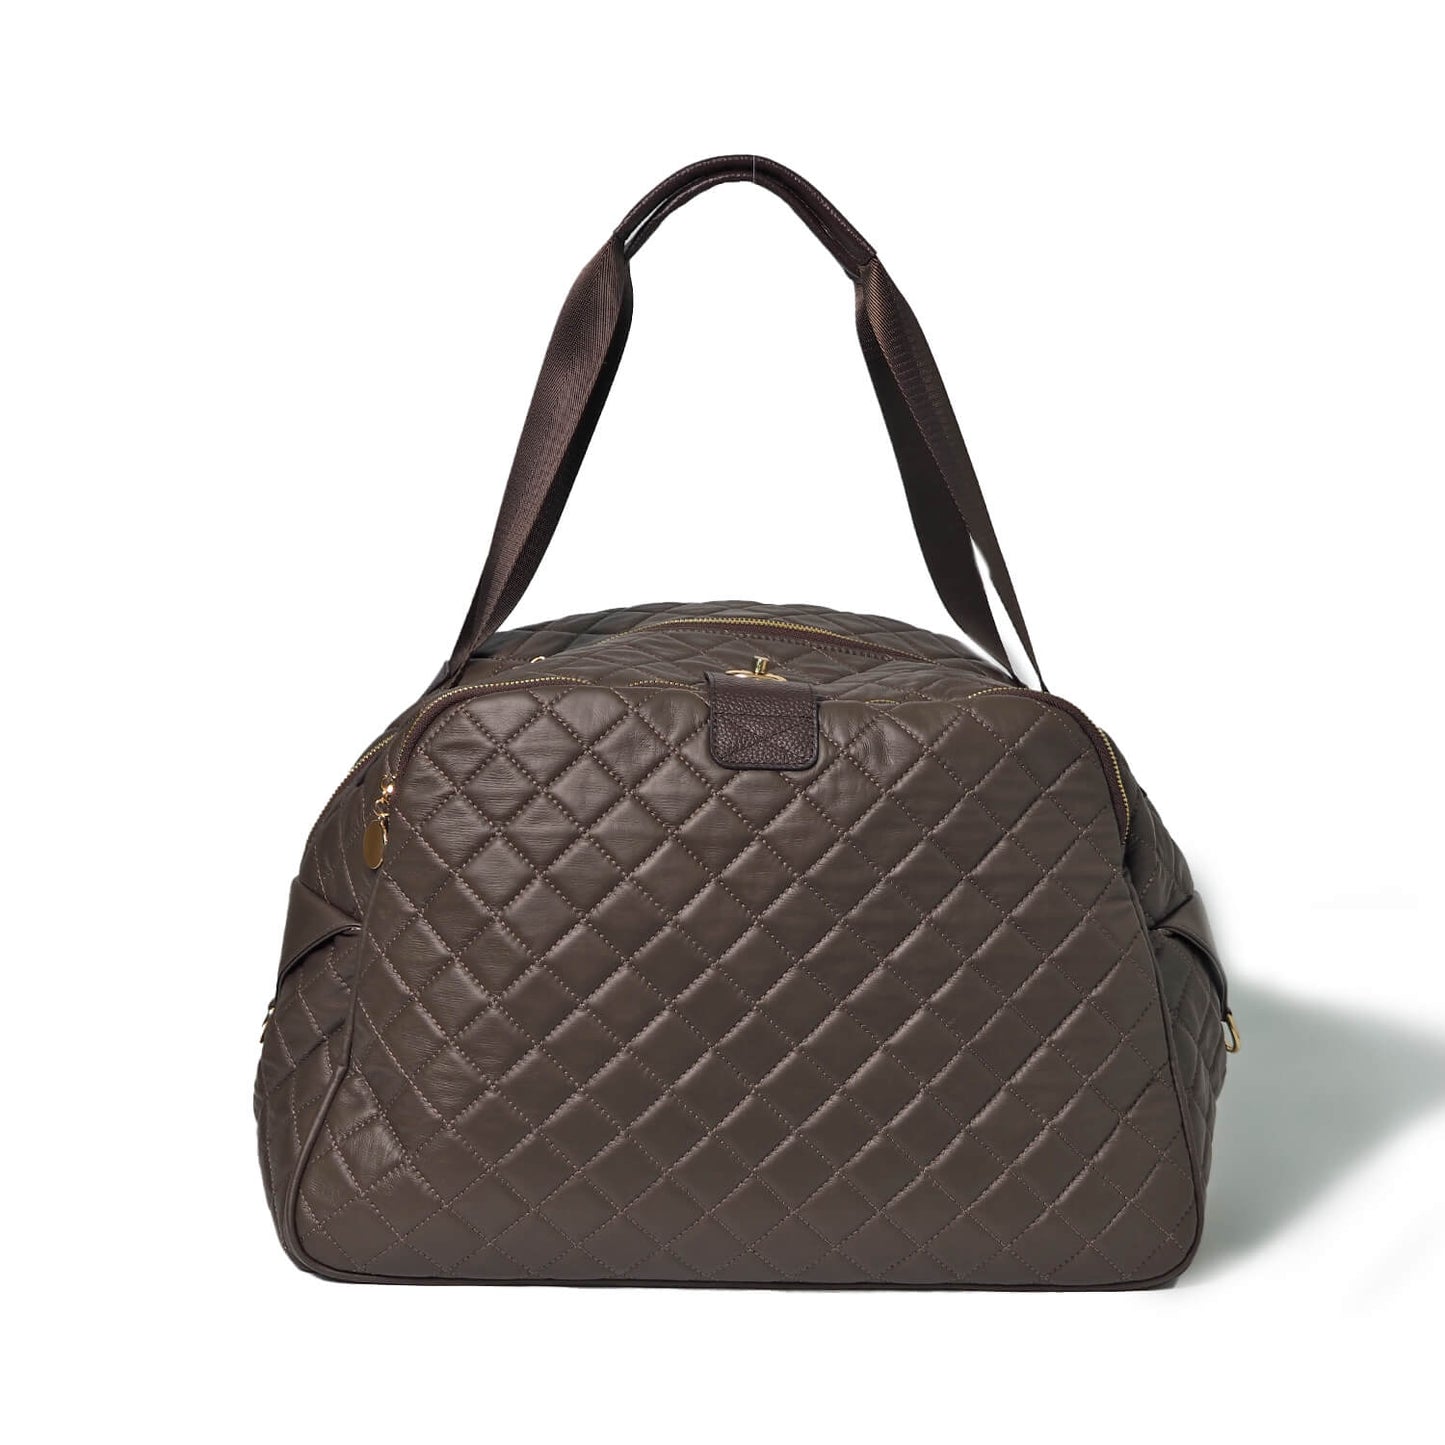 Travel Boston bag 「Loche Quilted Boston Bag LL(Version 2)」 Color: Chocolate brown (Gold-color hardware)